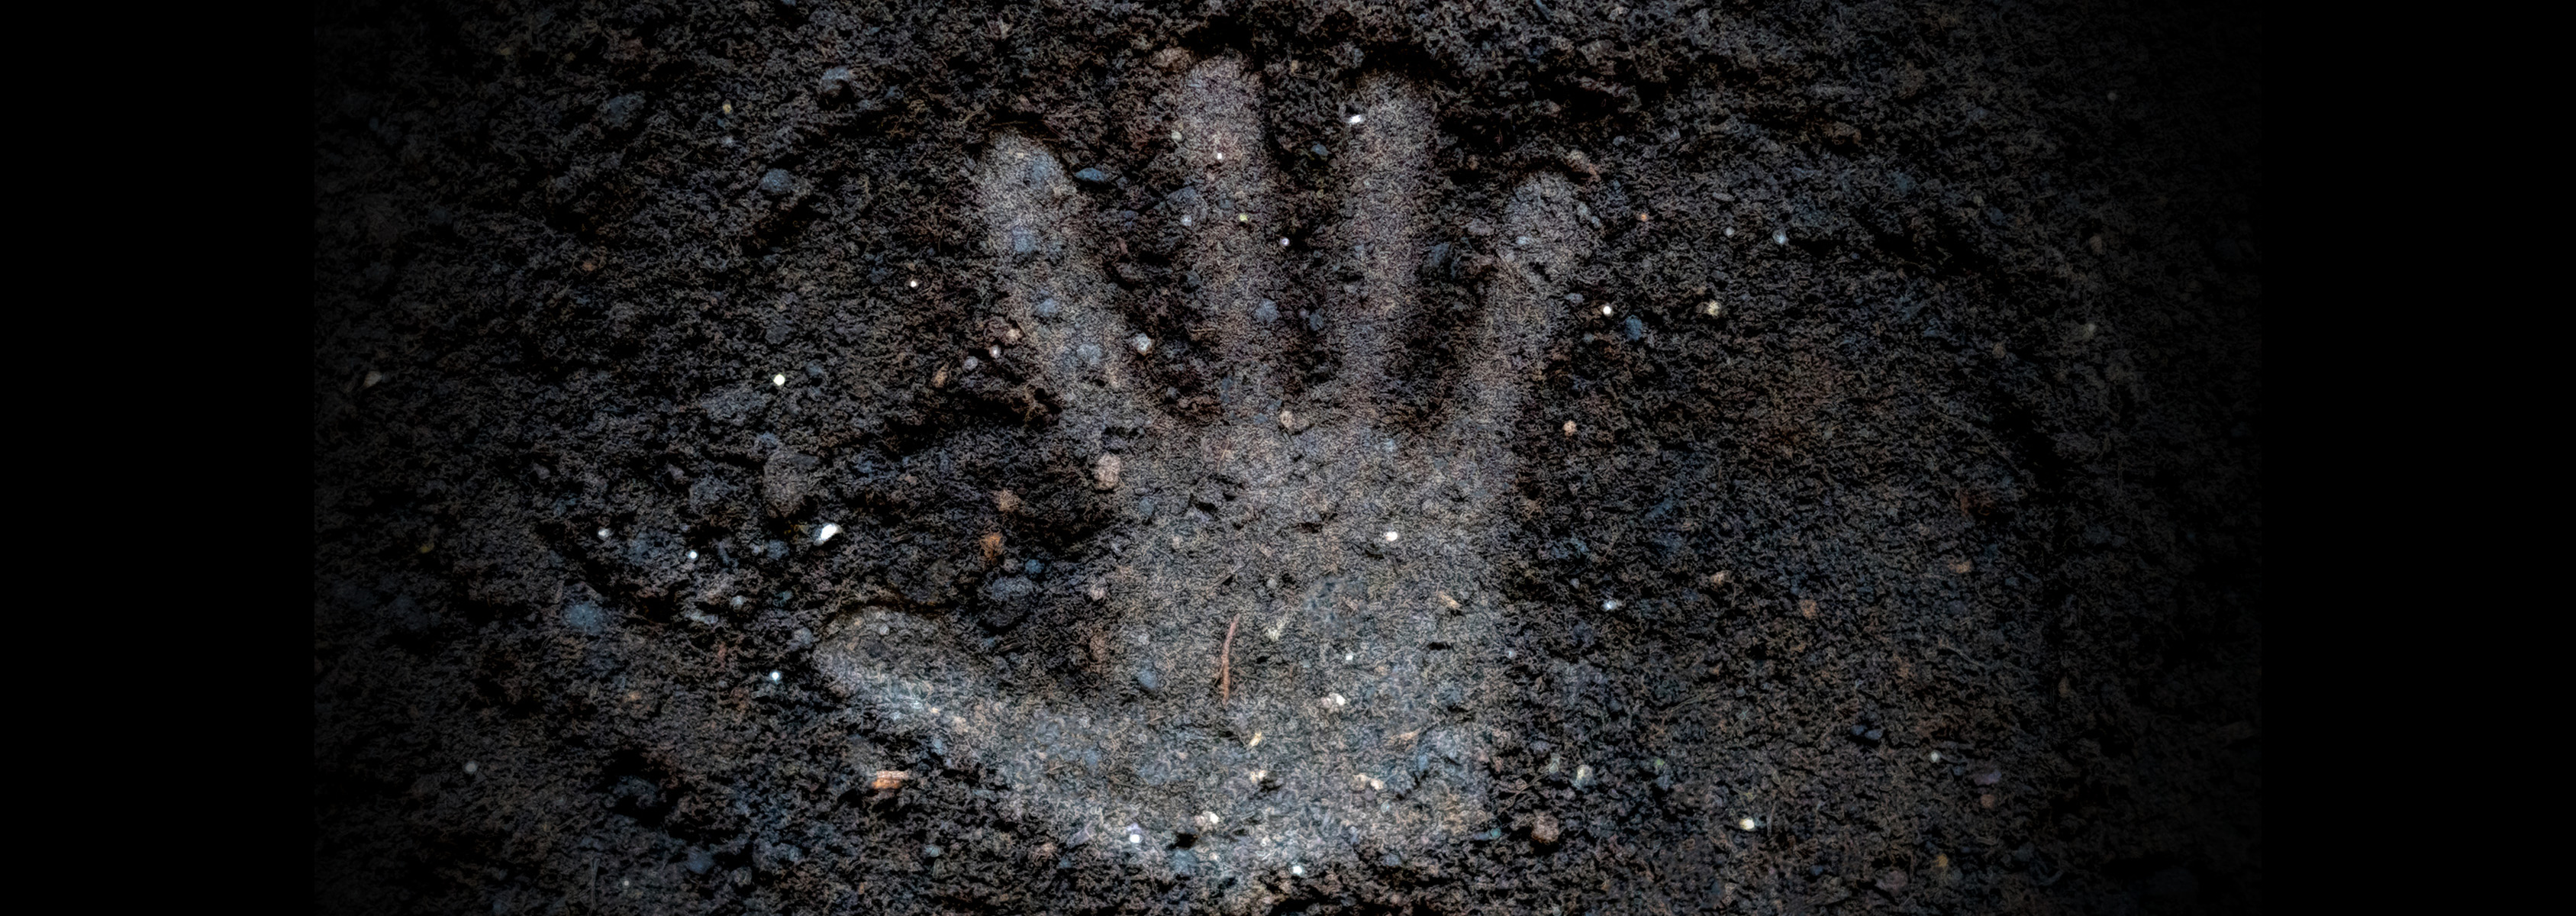 Image of a hand print in soil. 